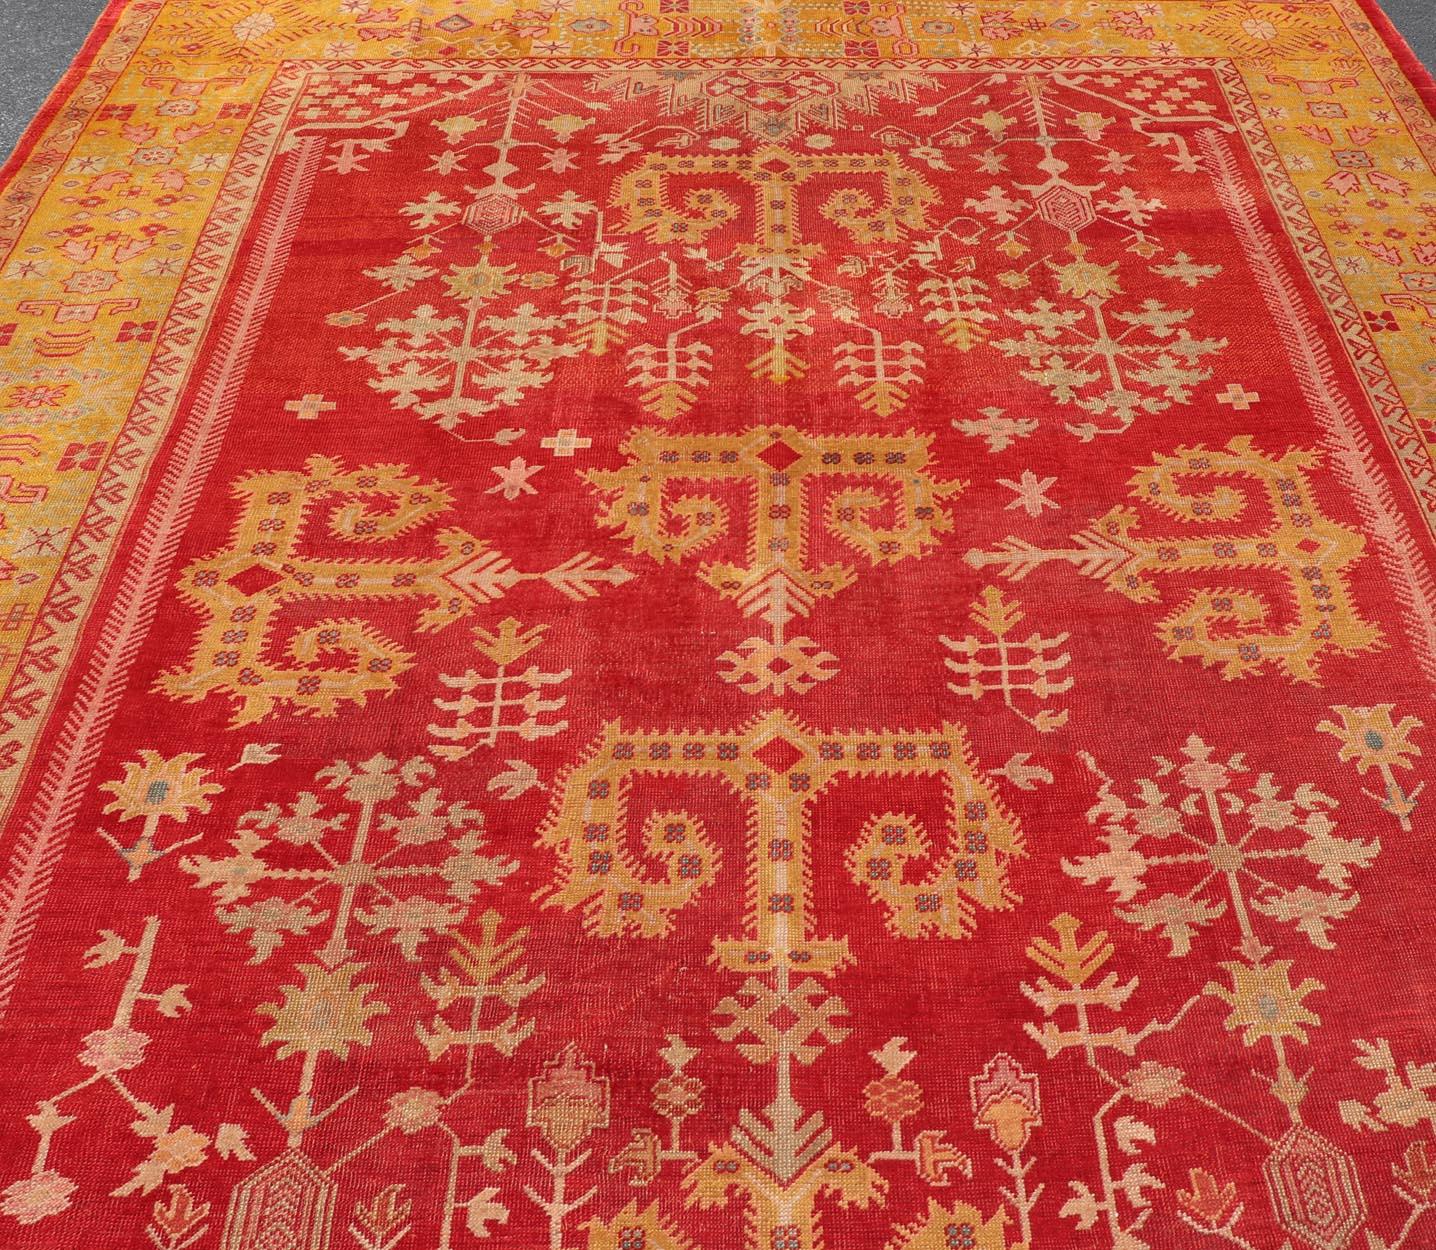 Antique Turkish Oushak Rug in Royal Red and Saffron Gold with Geometric Design For Sale 9